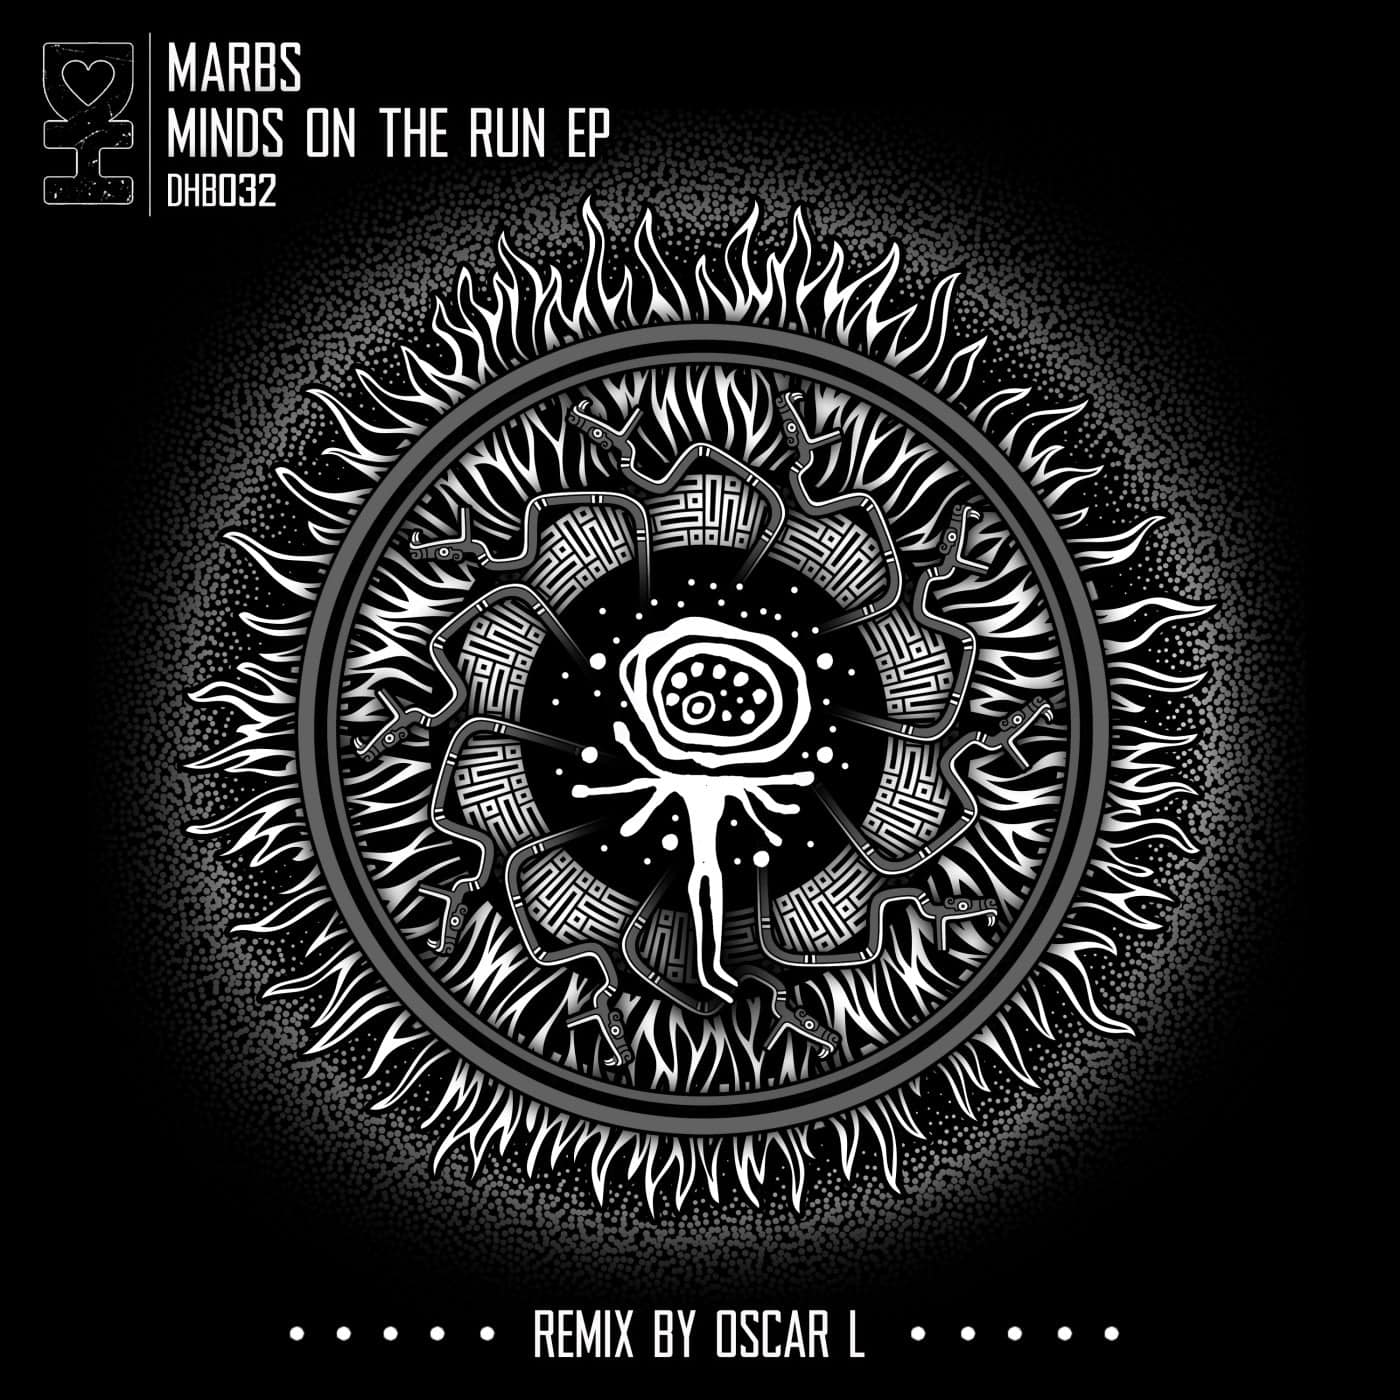 image cover: Marbs - Minds on the Run / DHB032